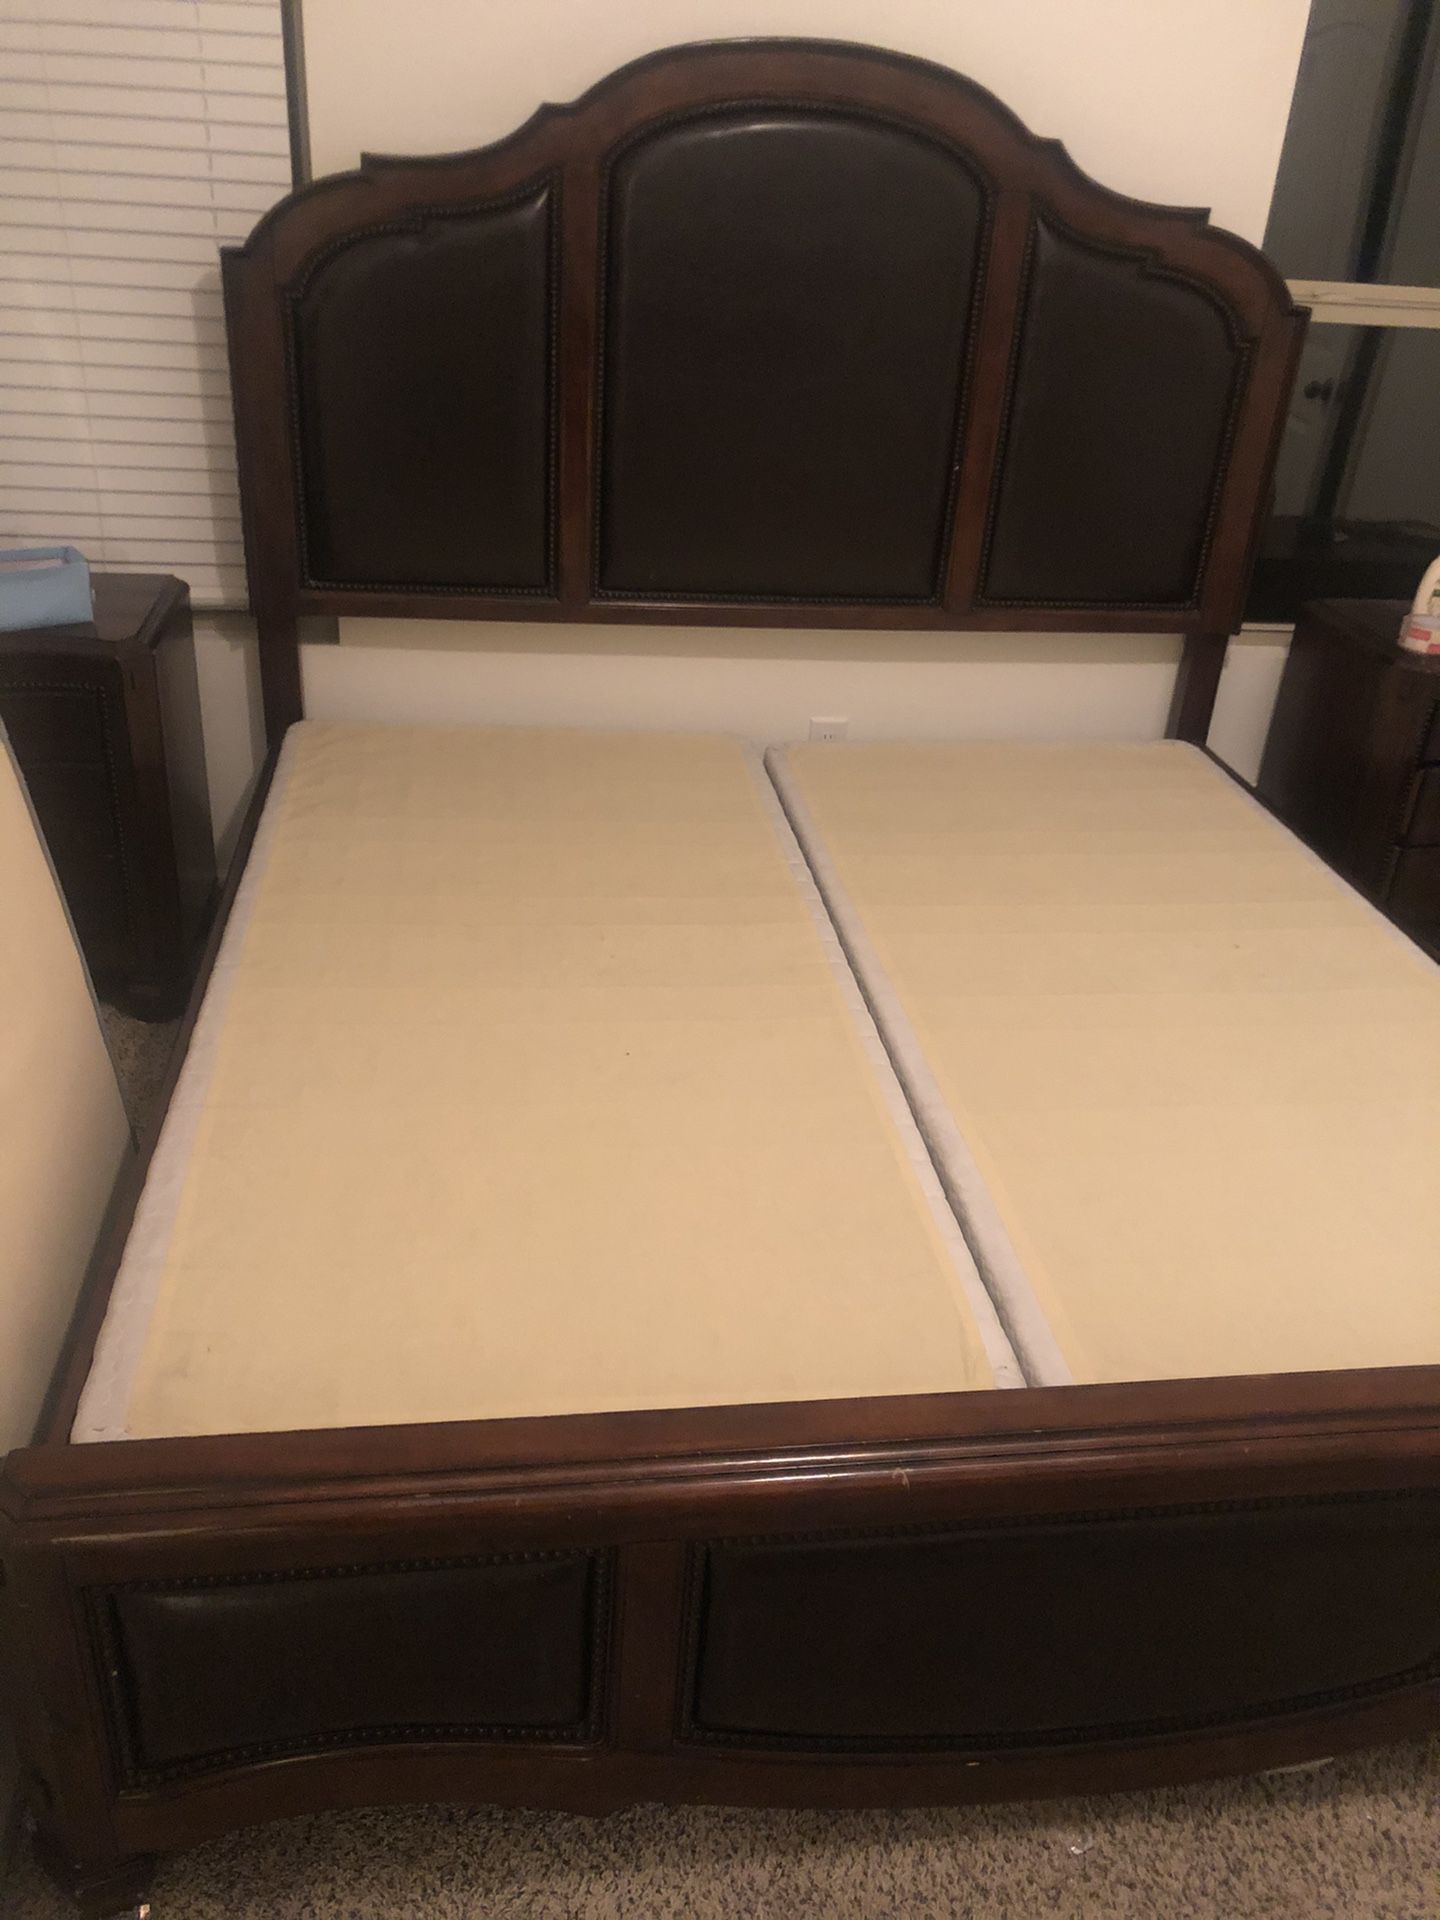 King Bed Frame( header and footer) , w/ frame, and box